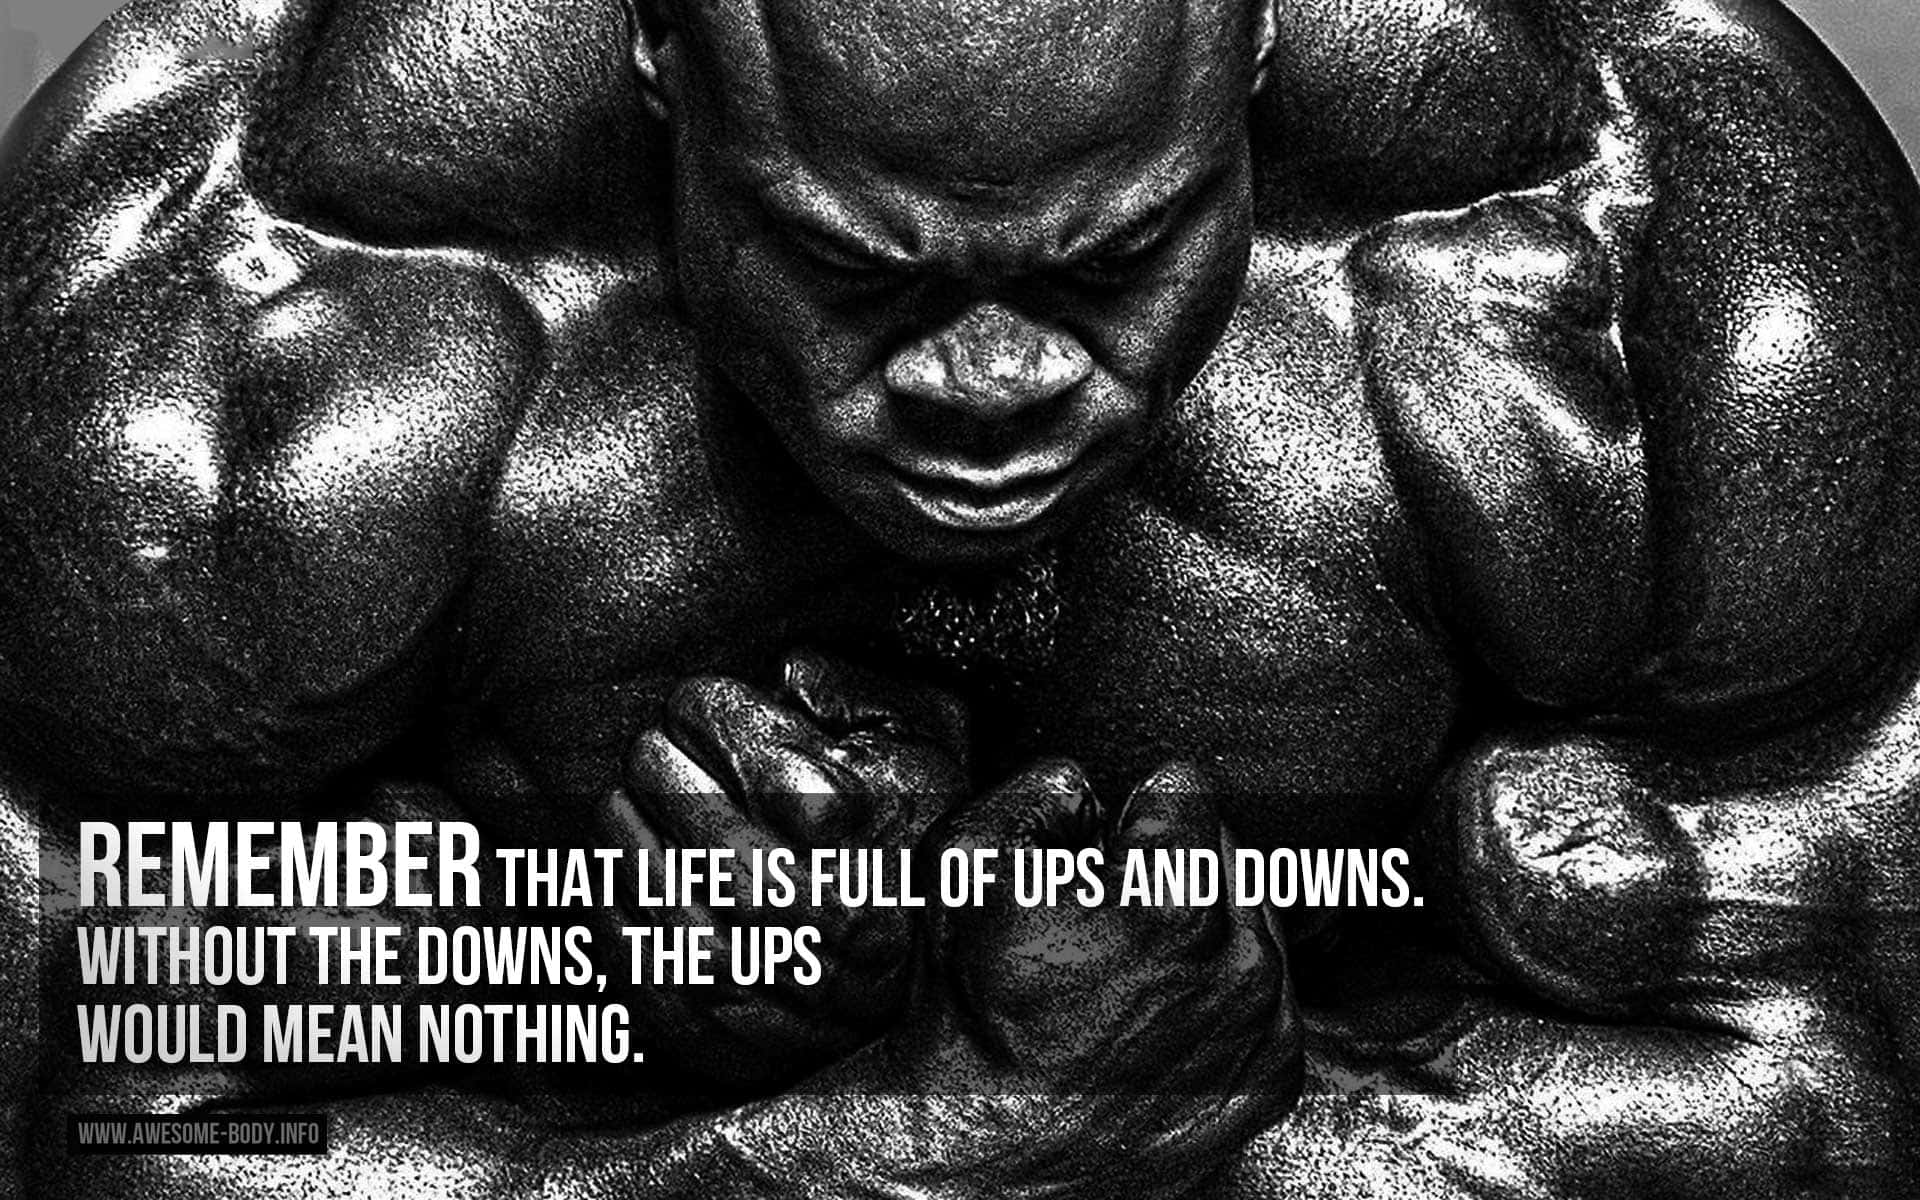 A Bodybuilding Quote With The Words Remember That Life Is Full Of Ups And Downs